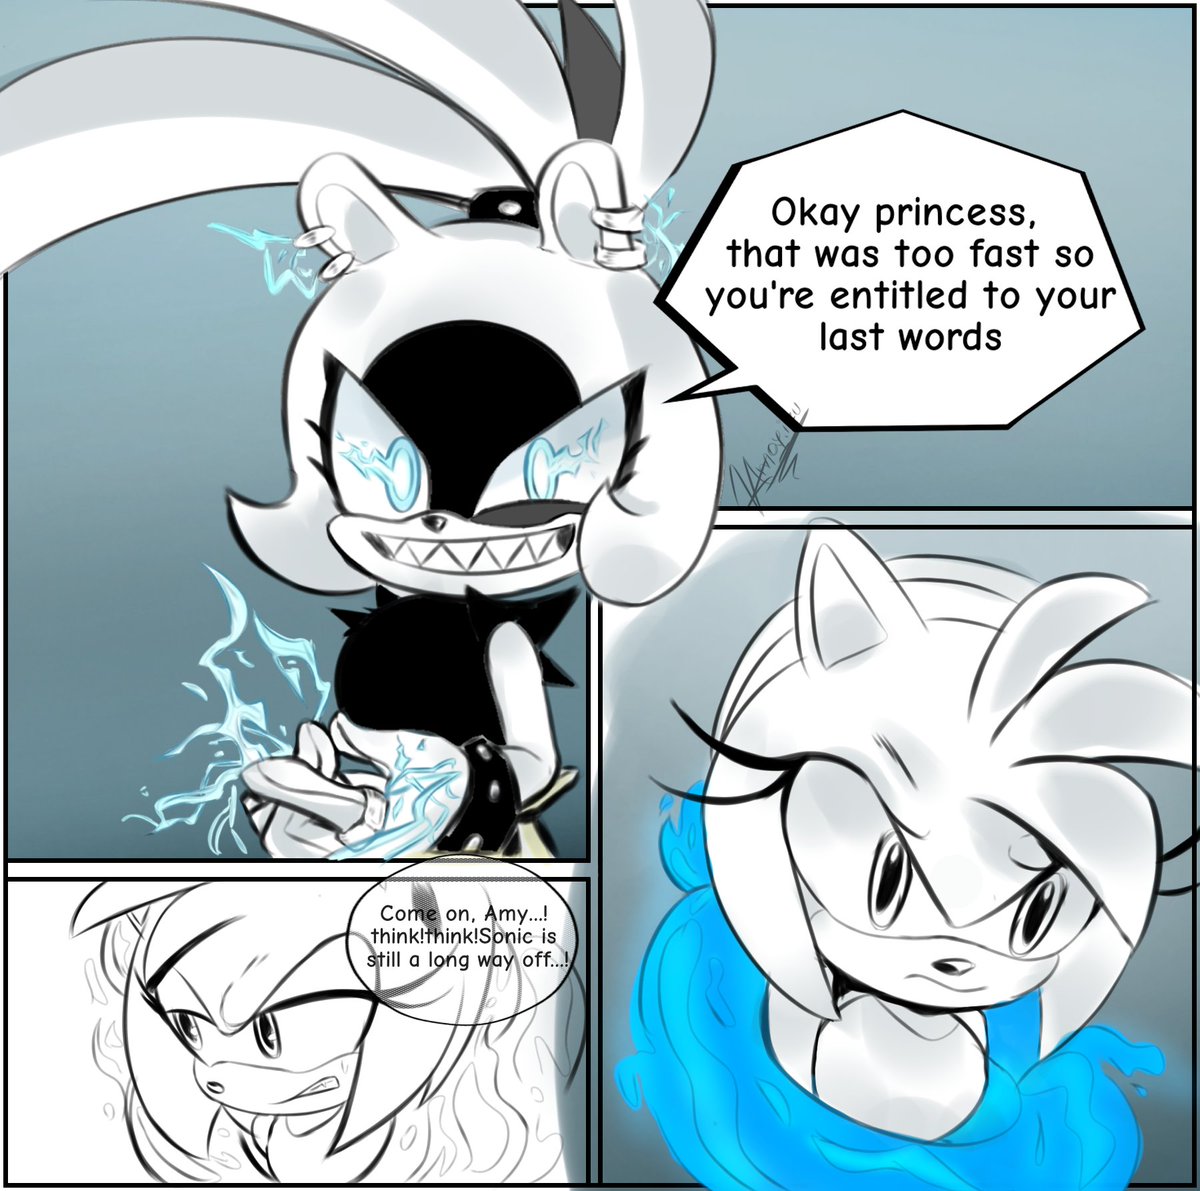 It's been a while since I've drawn on my cell phone so... I need to get back into practice, this is pretty bad in my eyes but... I'll post it anyway!  there will be more
#SurgeAmy #AmyRose #SurgeTheTenrec #Surge #Comic #fanart #Kitthefennec #KitsunamiTheFennec